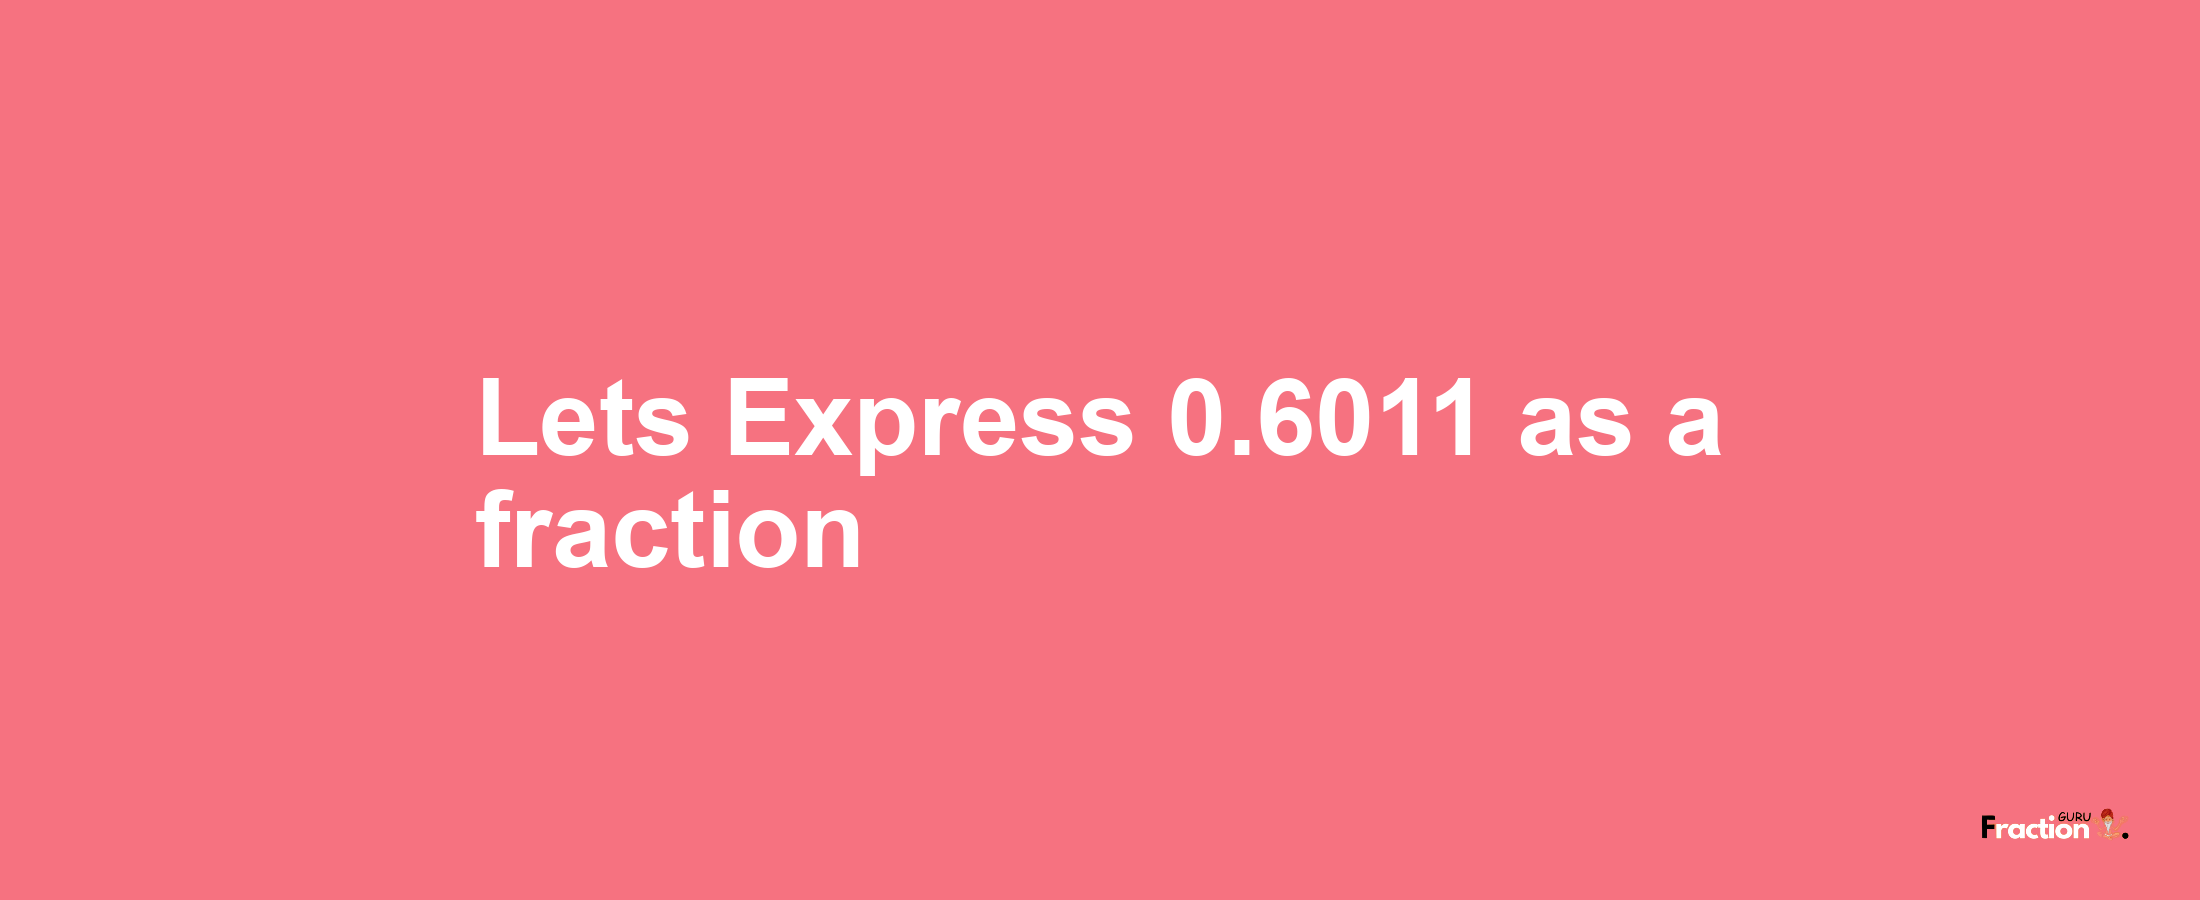 Lets Express 0.6011 as afraction